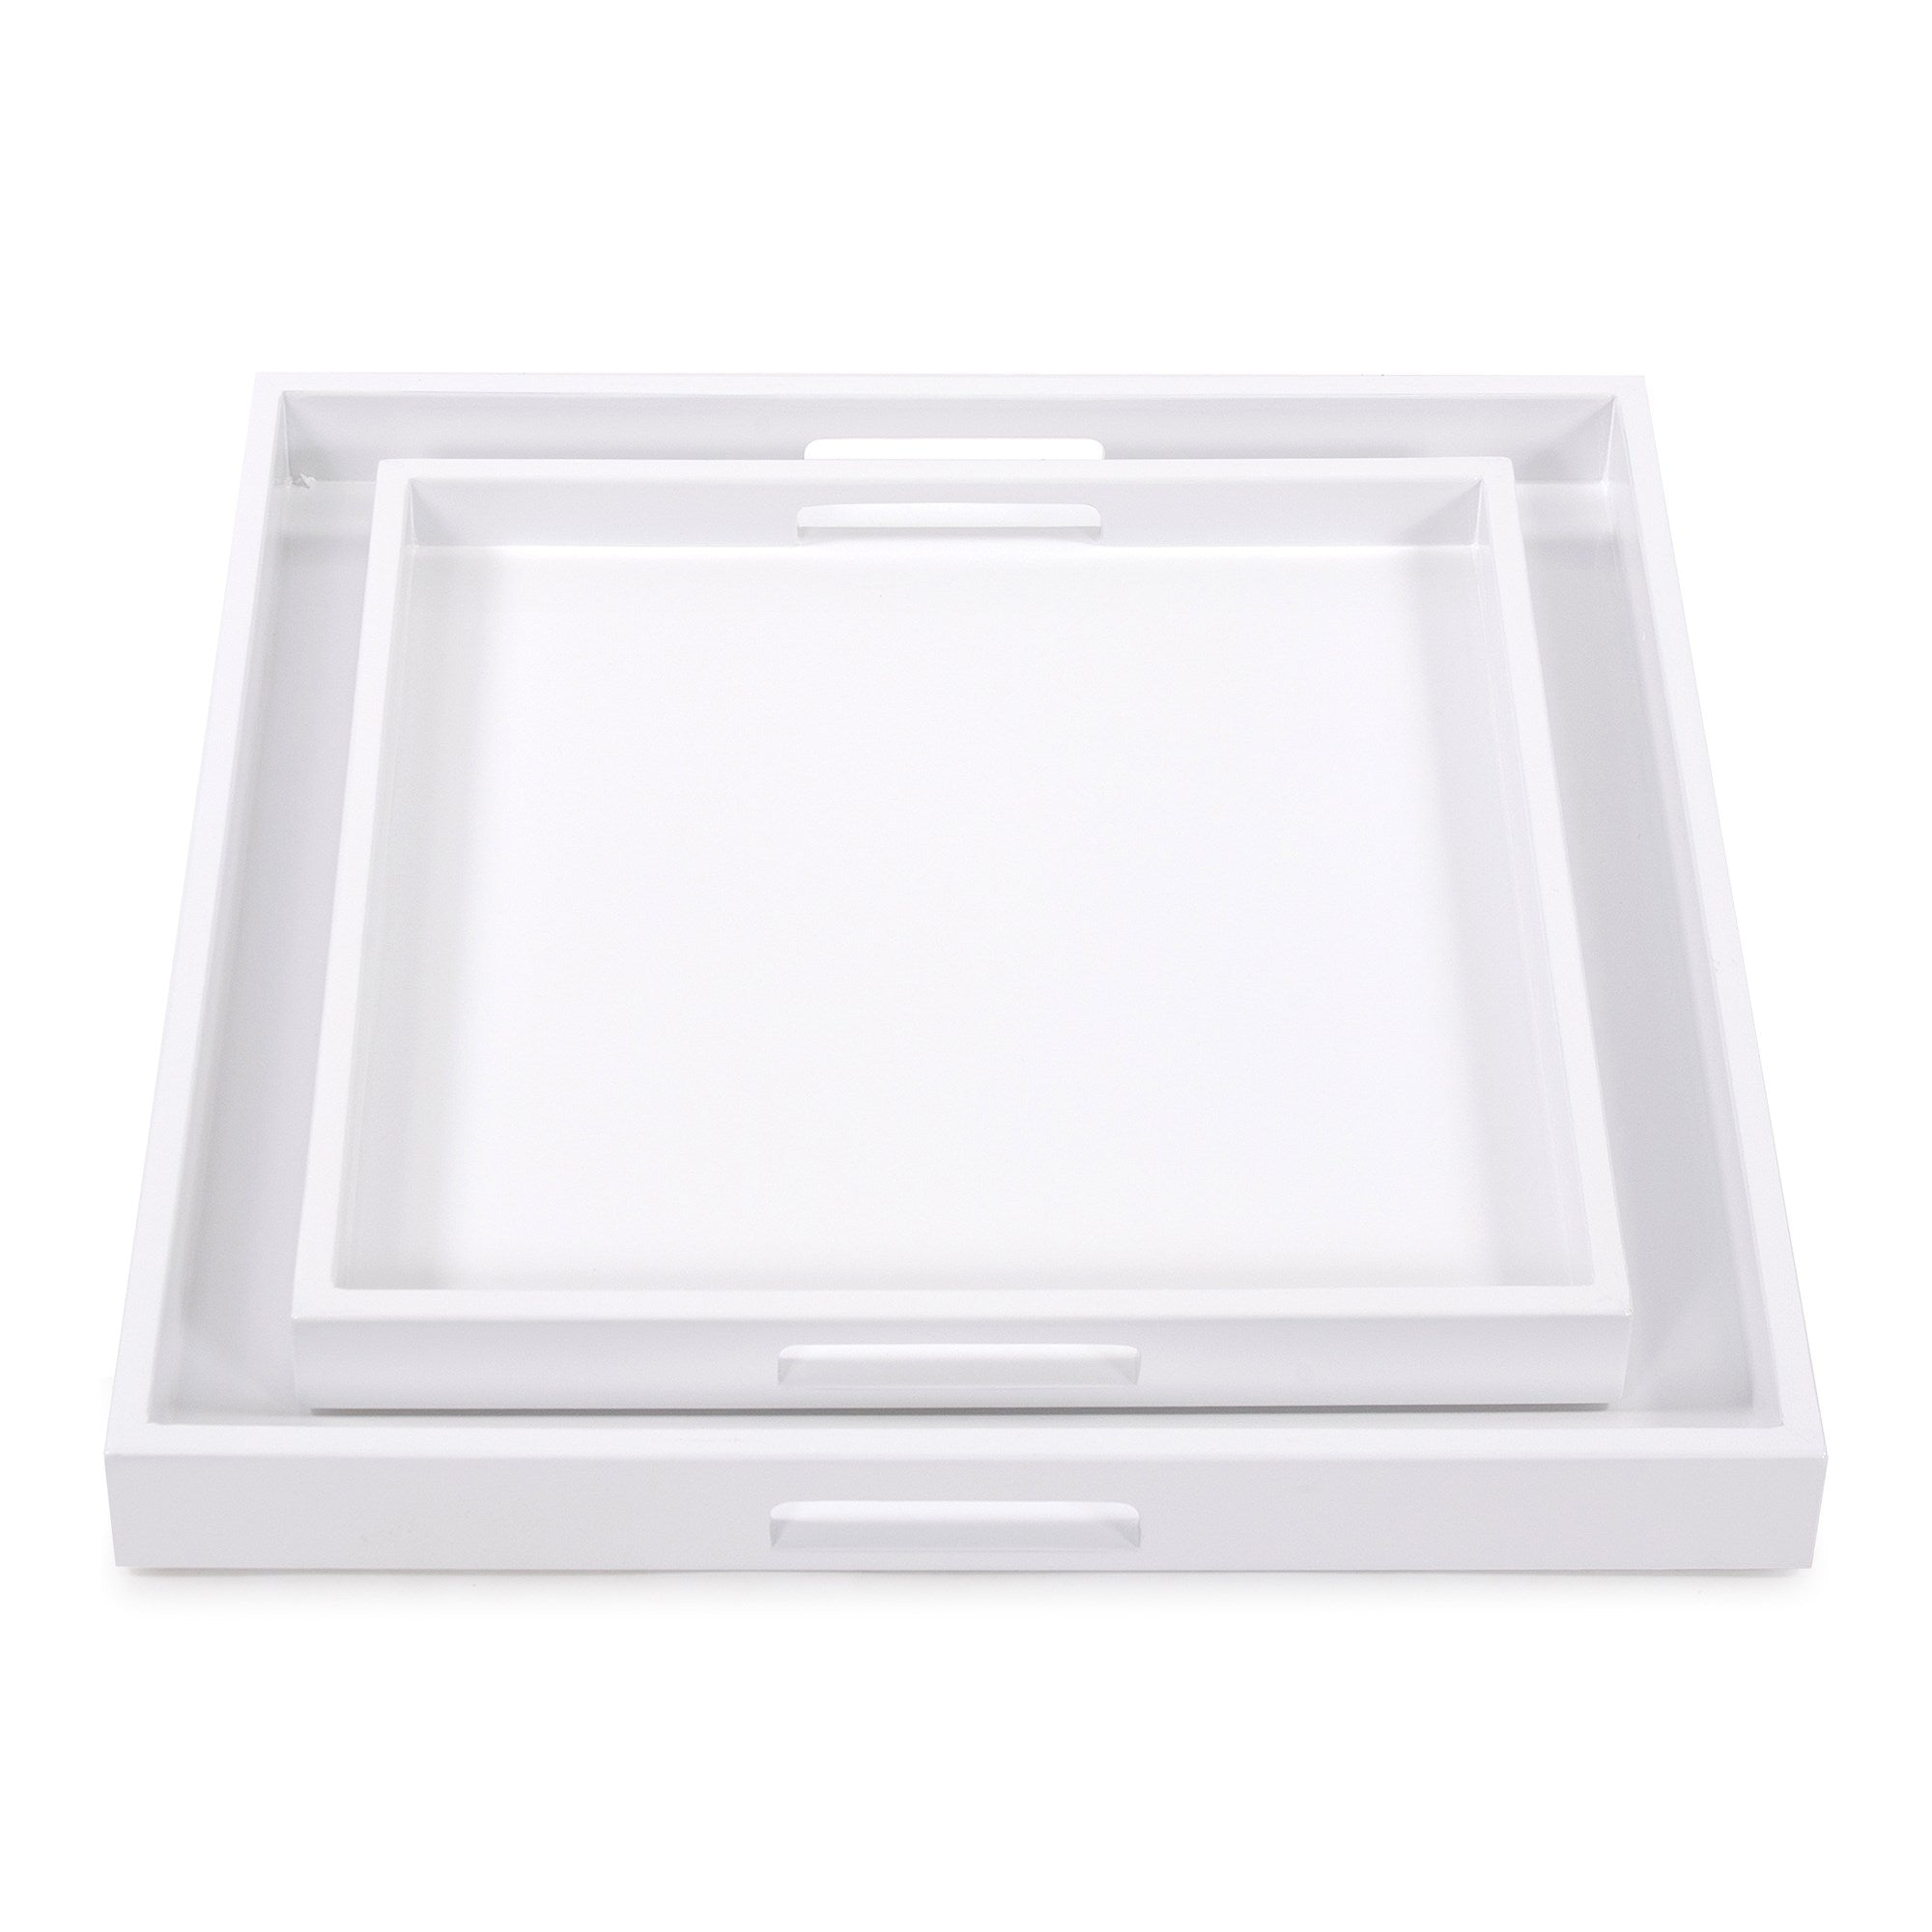 White Lacquer Square Wood Tray Set